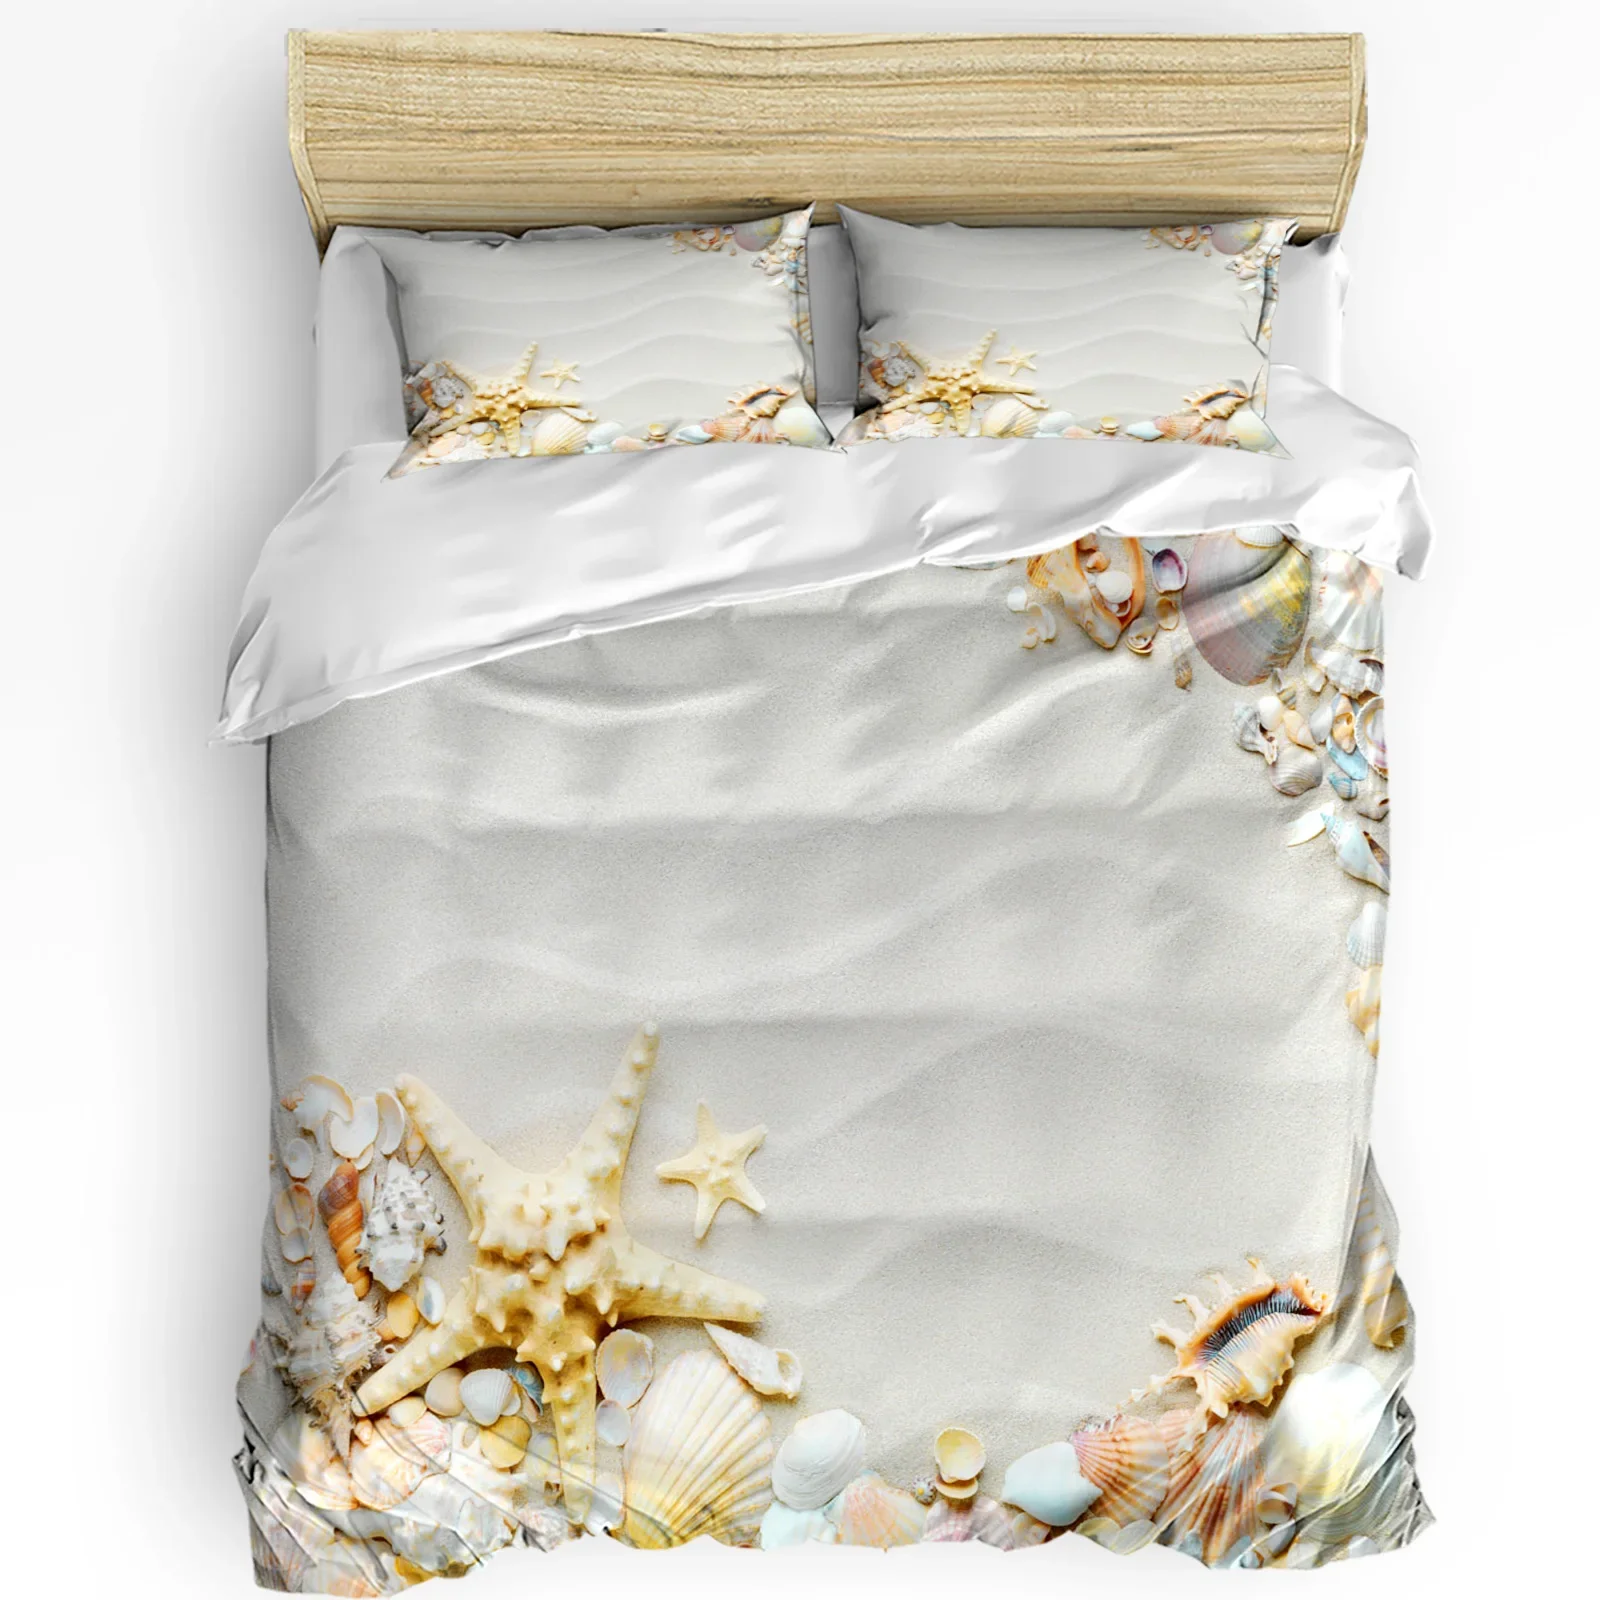 

Beach Sand Waves Starfish Shell Conch 3pcs Bedding Set For Bedroom Double Bed Home Textile Duvet Cover Quilt Cover Pillowcase